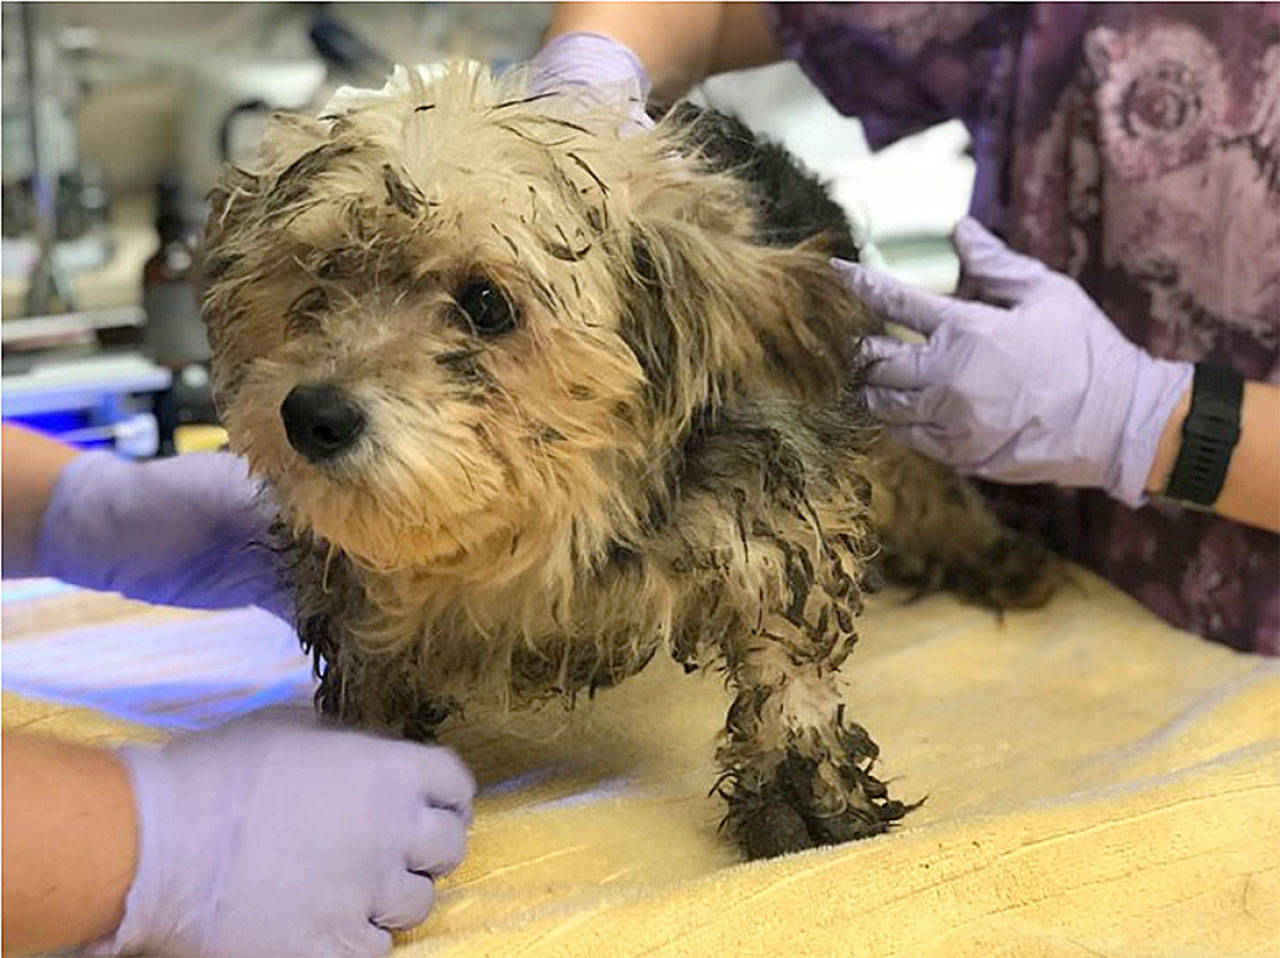 Filthy and neglected animals rescued from home near Chico